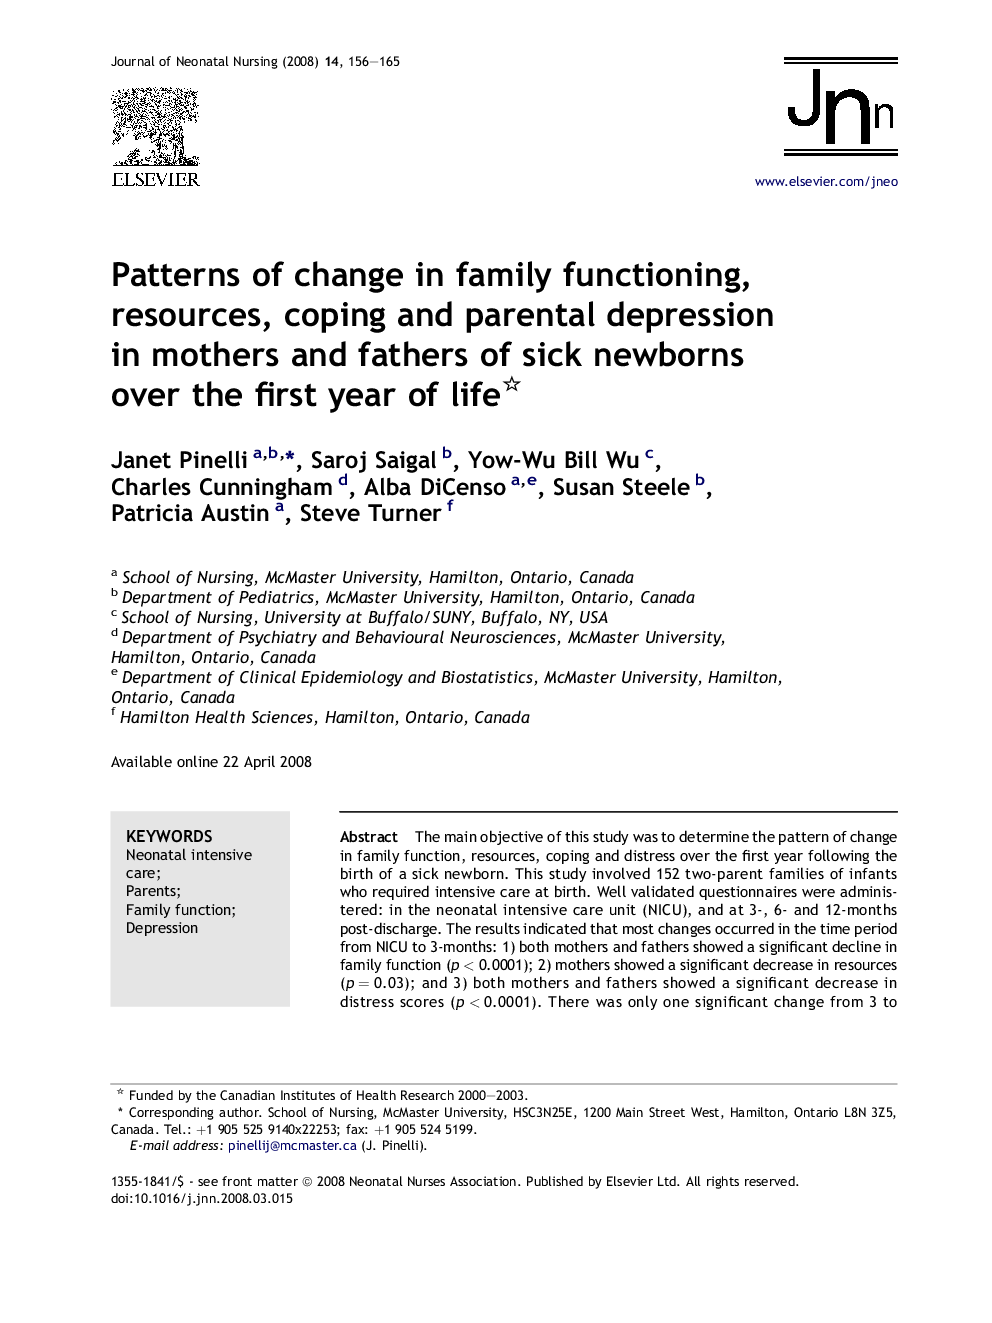 Patterns of change in family functioning, resources, coping and parental depression in mothers and fathers of sick newborns over the first year of life 